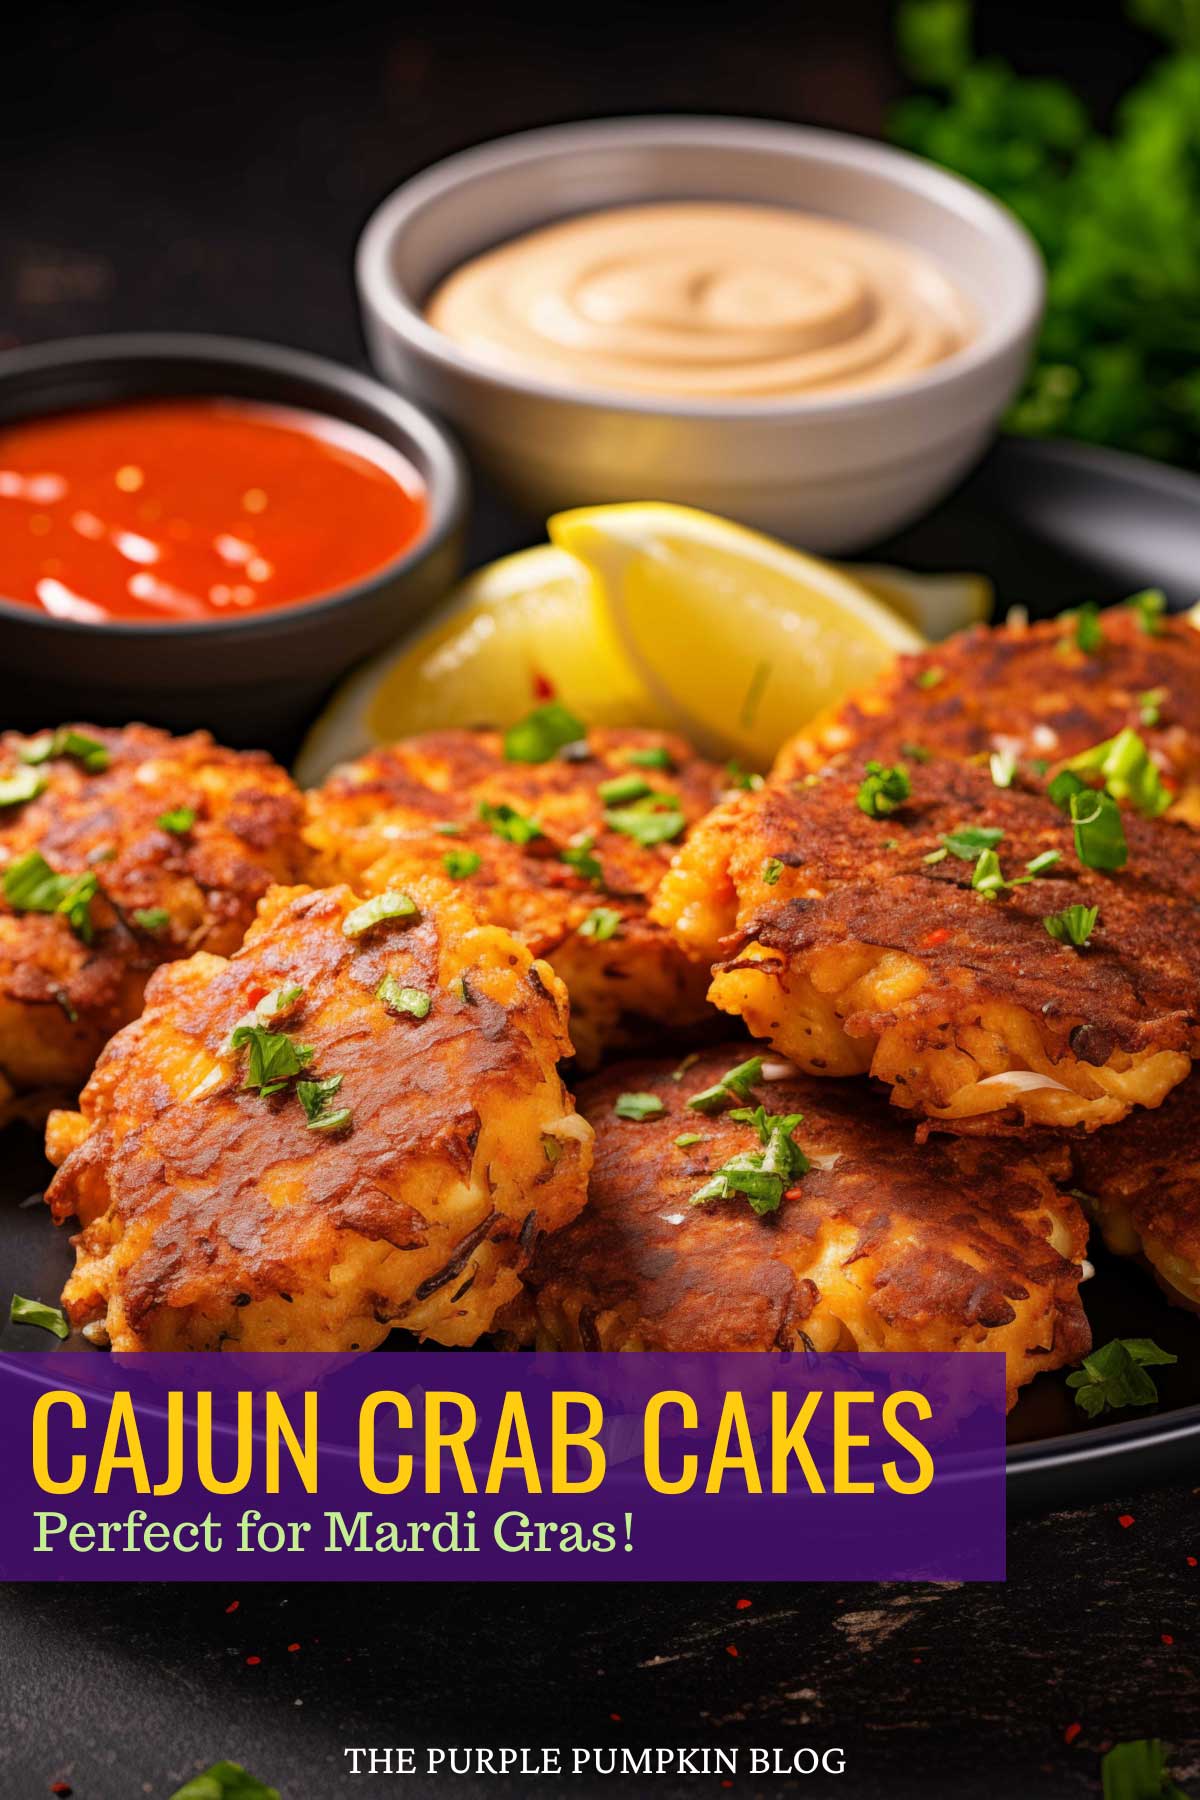 A plate of Cajun crab cakes with two bowls of dipping sauce, and text overlay that says "Cajun Crab Cakes - Perfect for Mardi Gras"